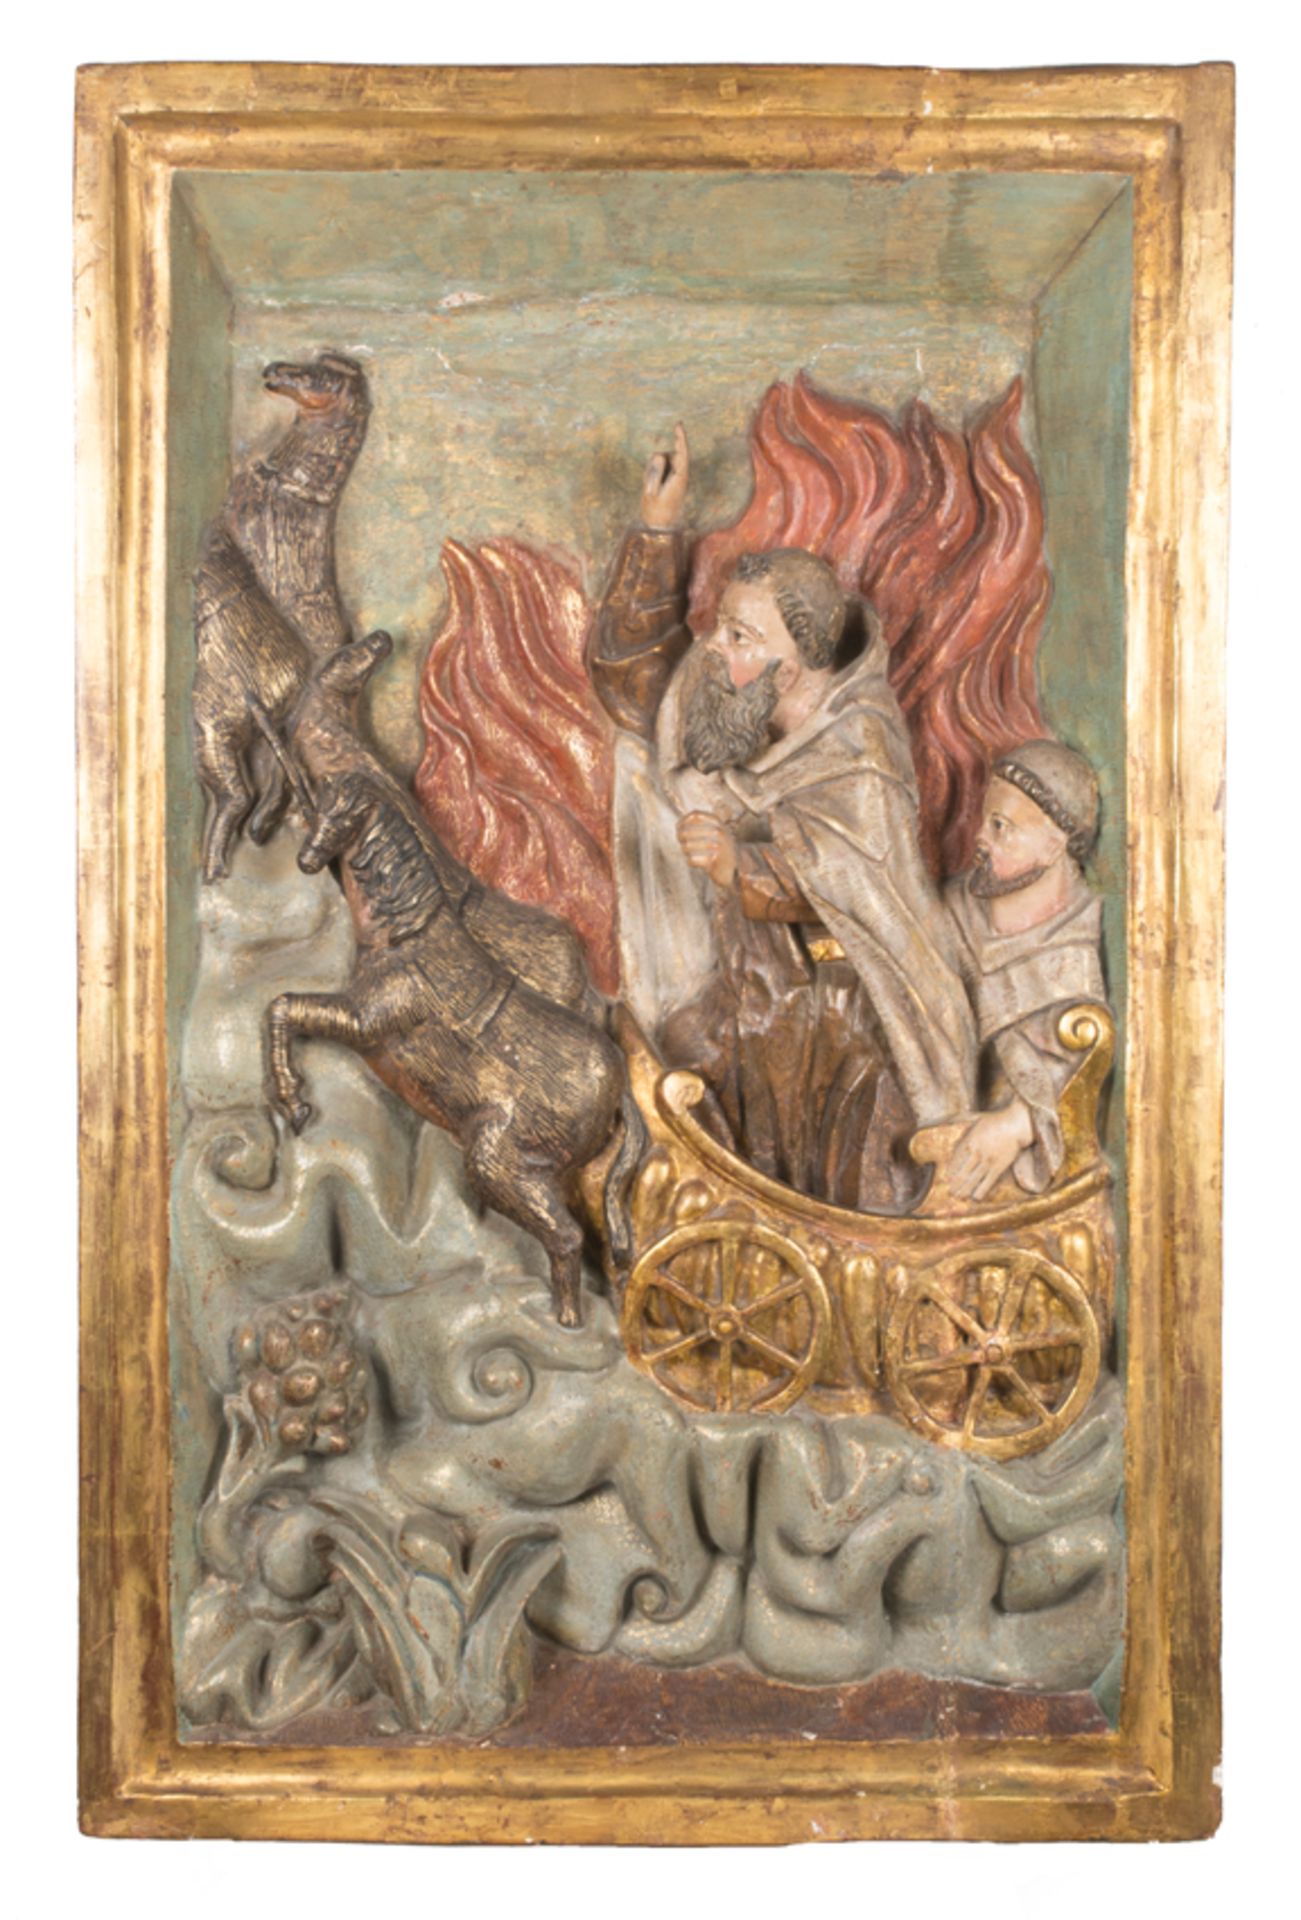 "Vision of Saint Francis in the flaming chariot". Carved, gilded and polychromed wooden relief. Col